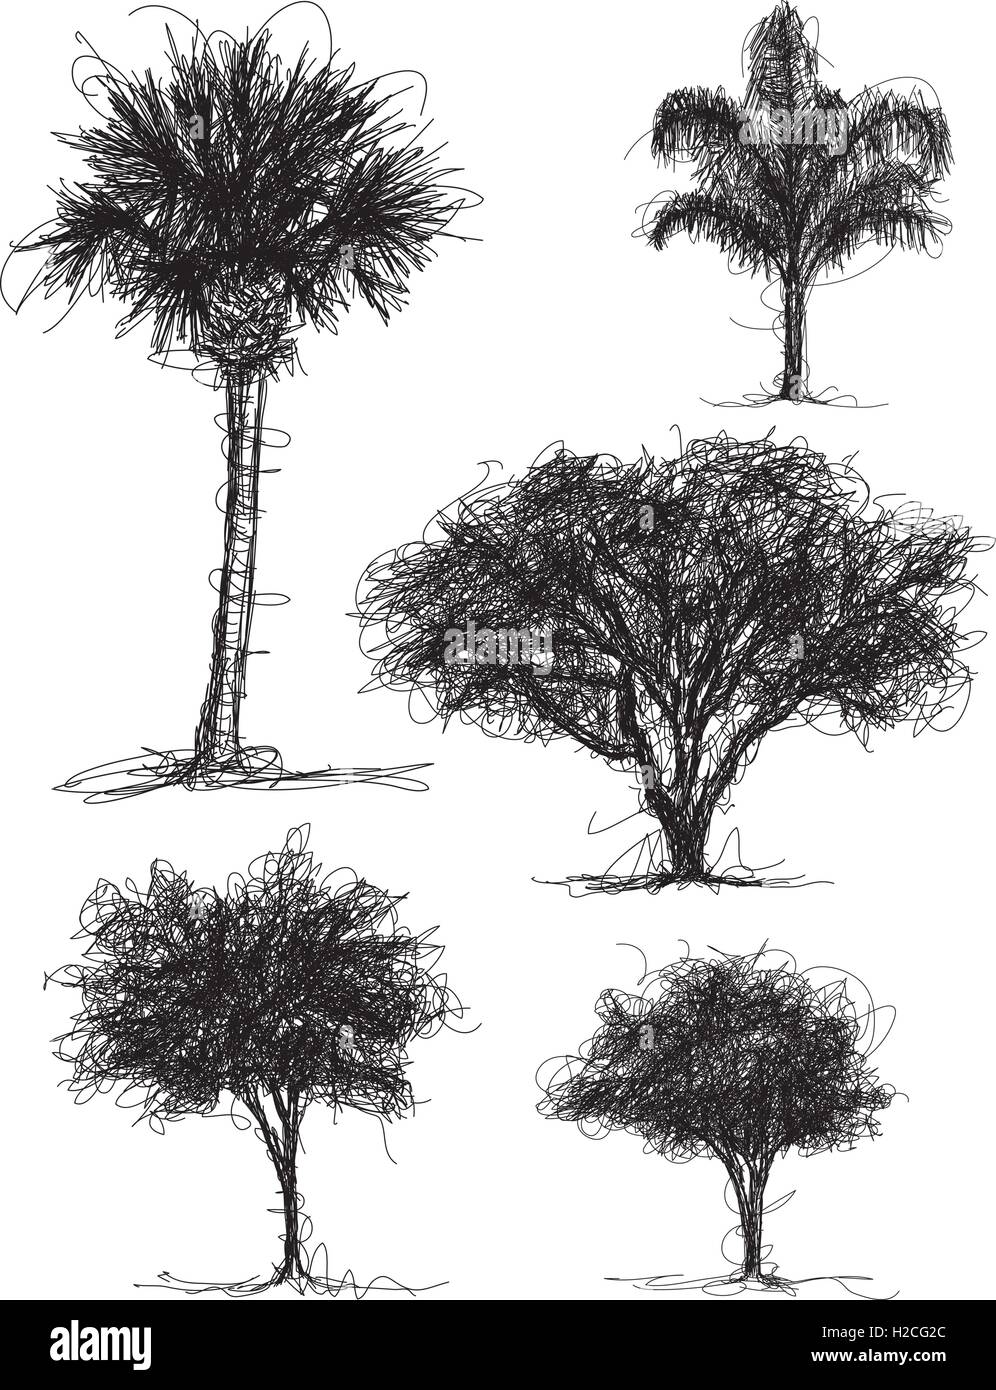 Tree Scribbles Palm tree, queen palm, oak tree, and other tree sketches Stock Vector